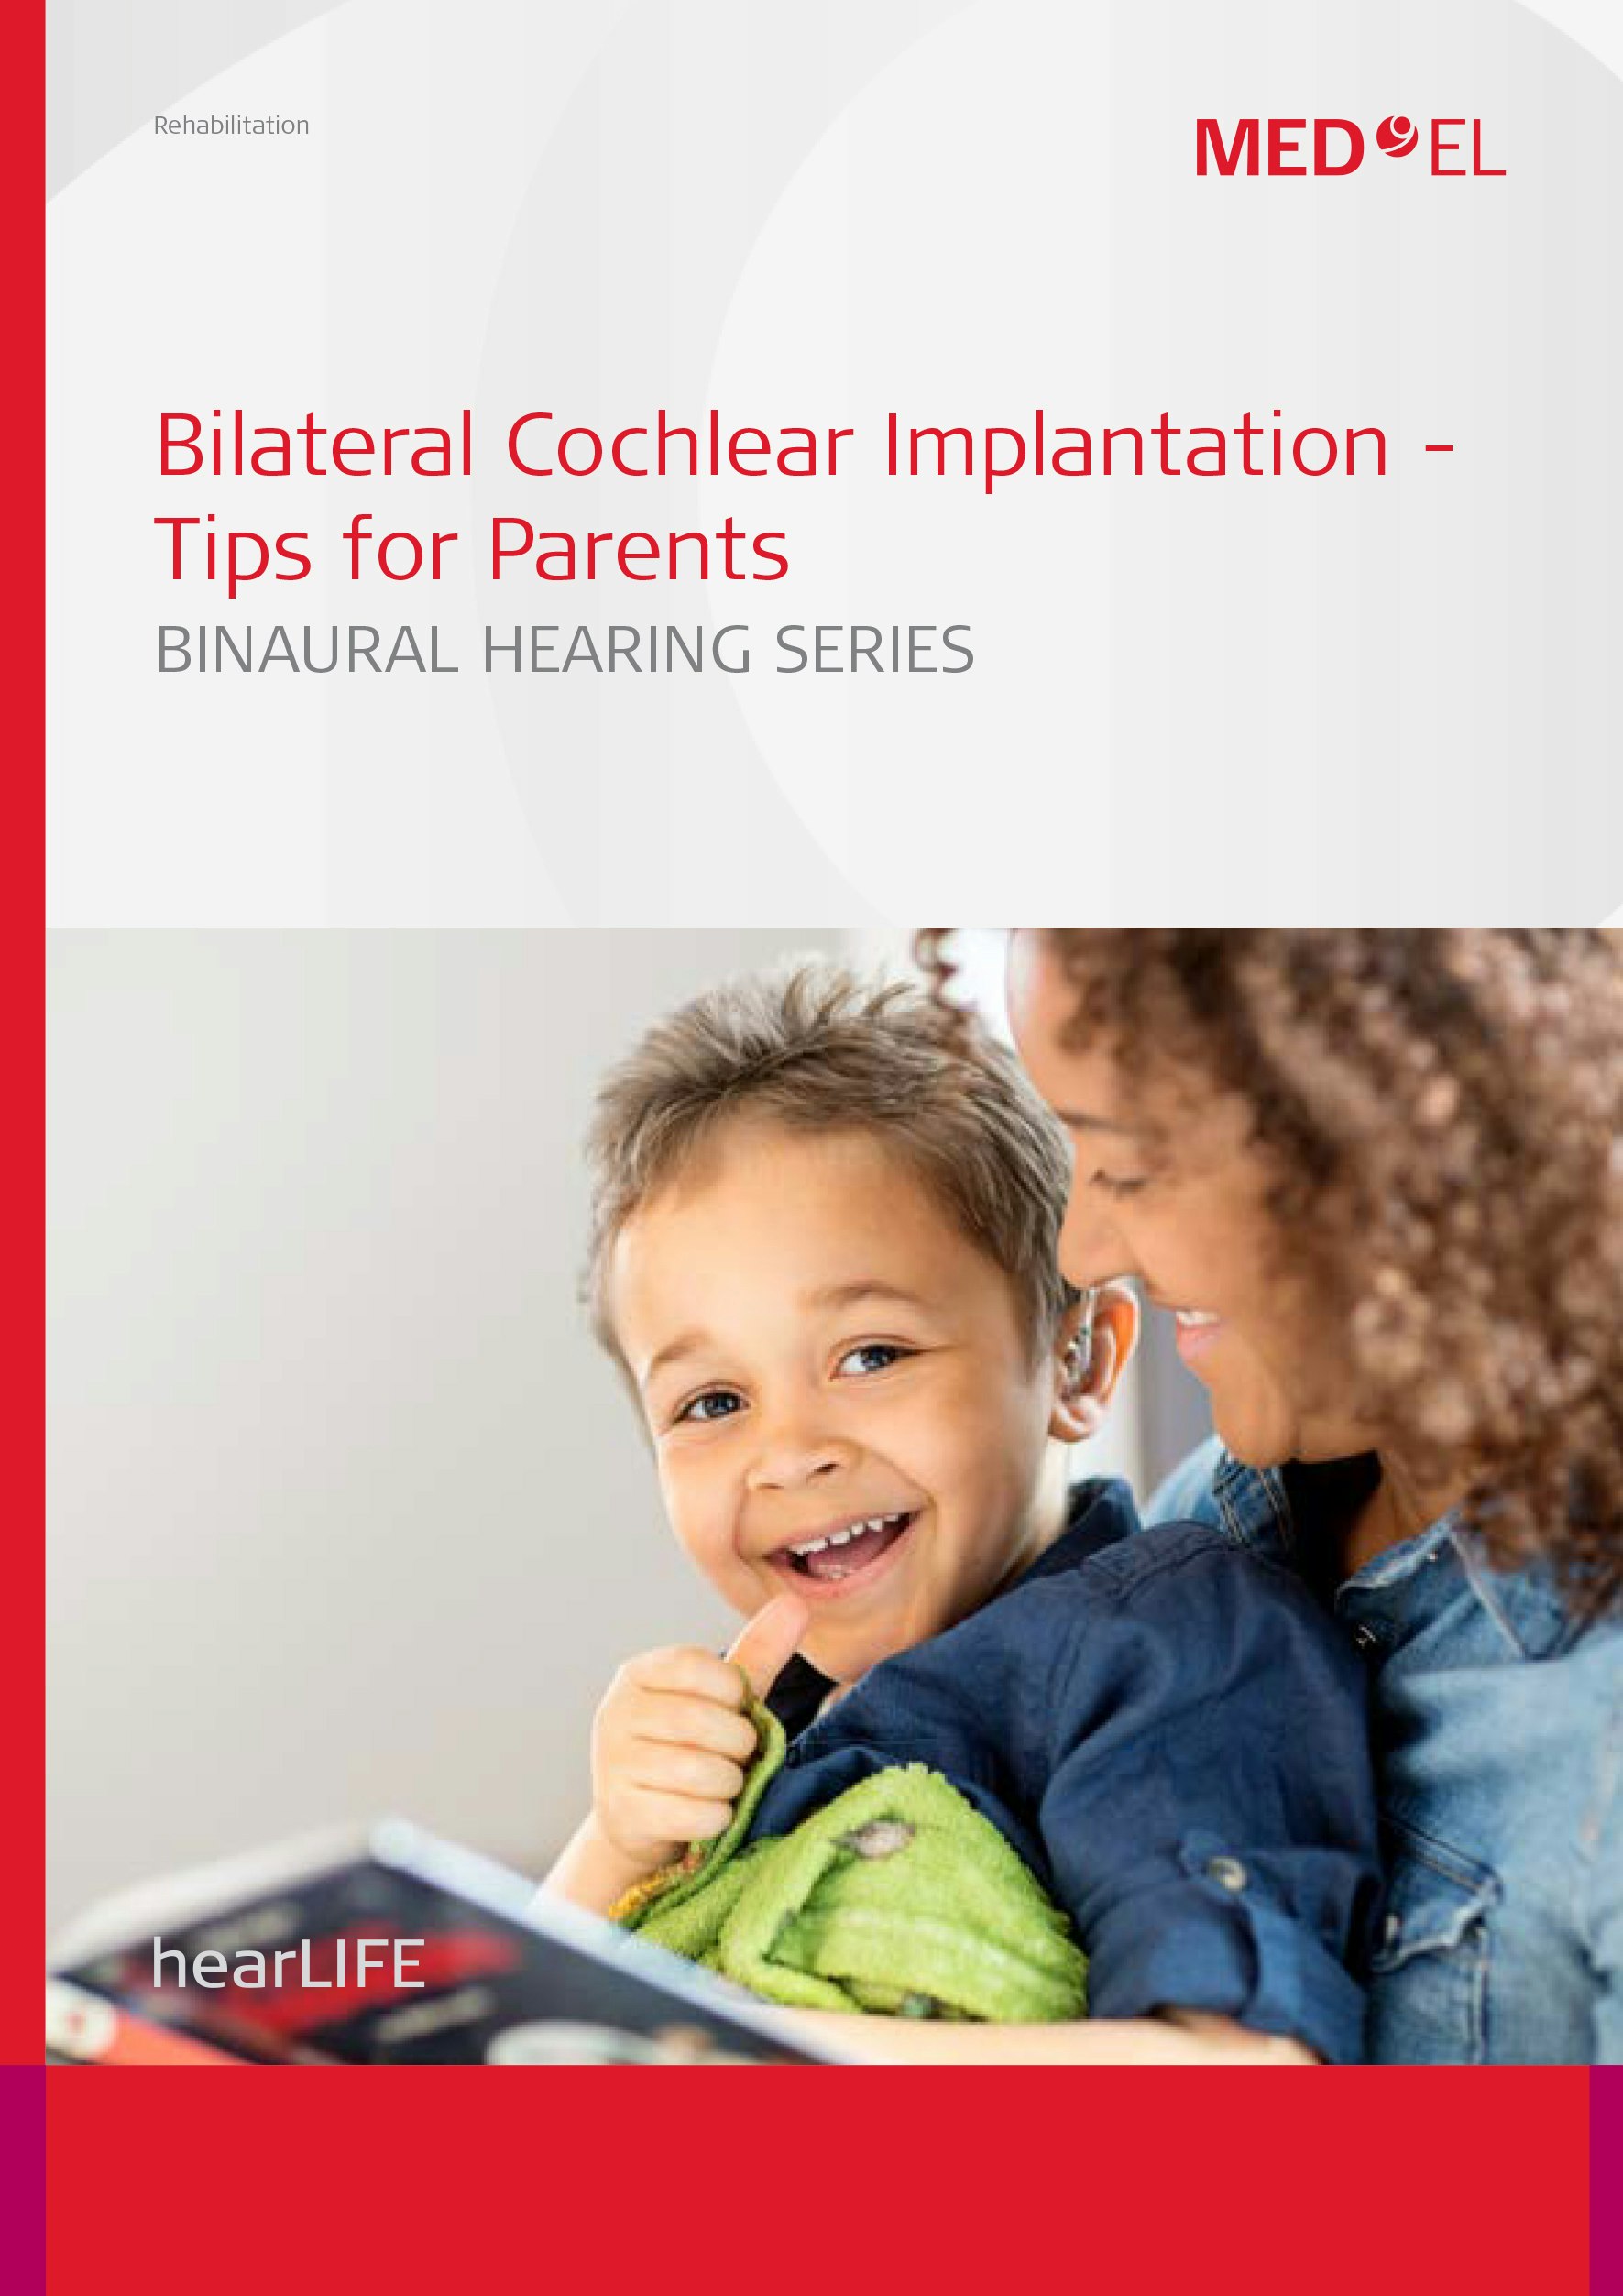 27898 1.0 Bilateral Cochlear Implantation - Tips for Parents